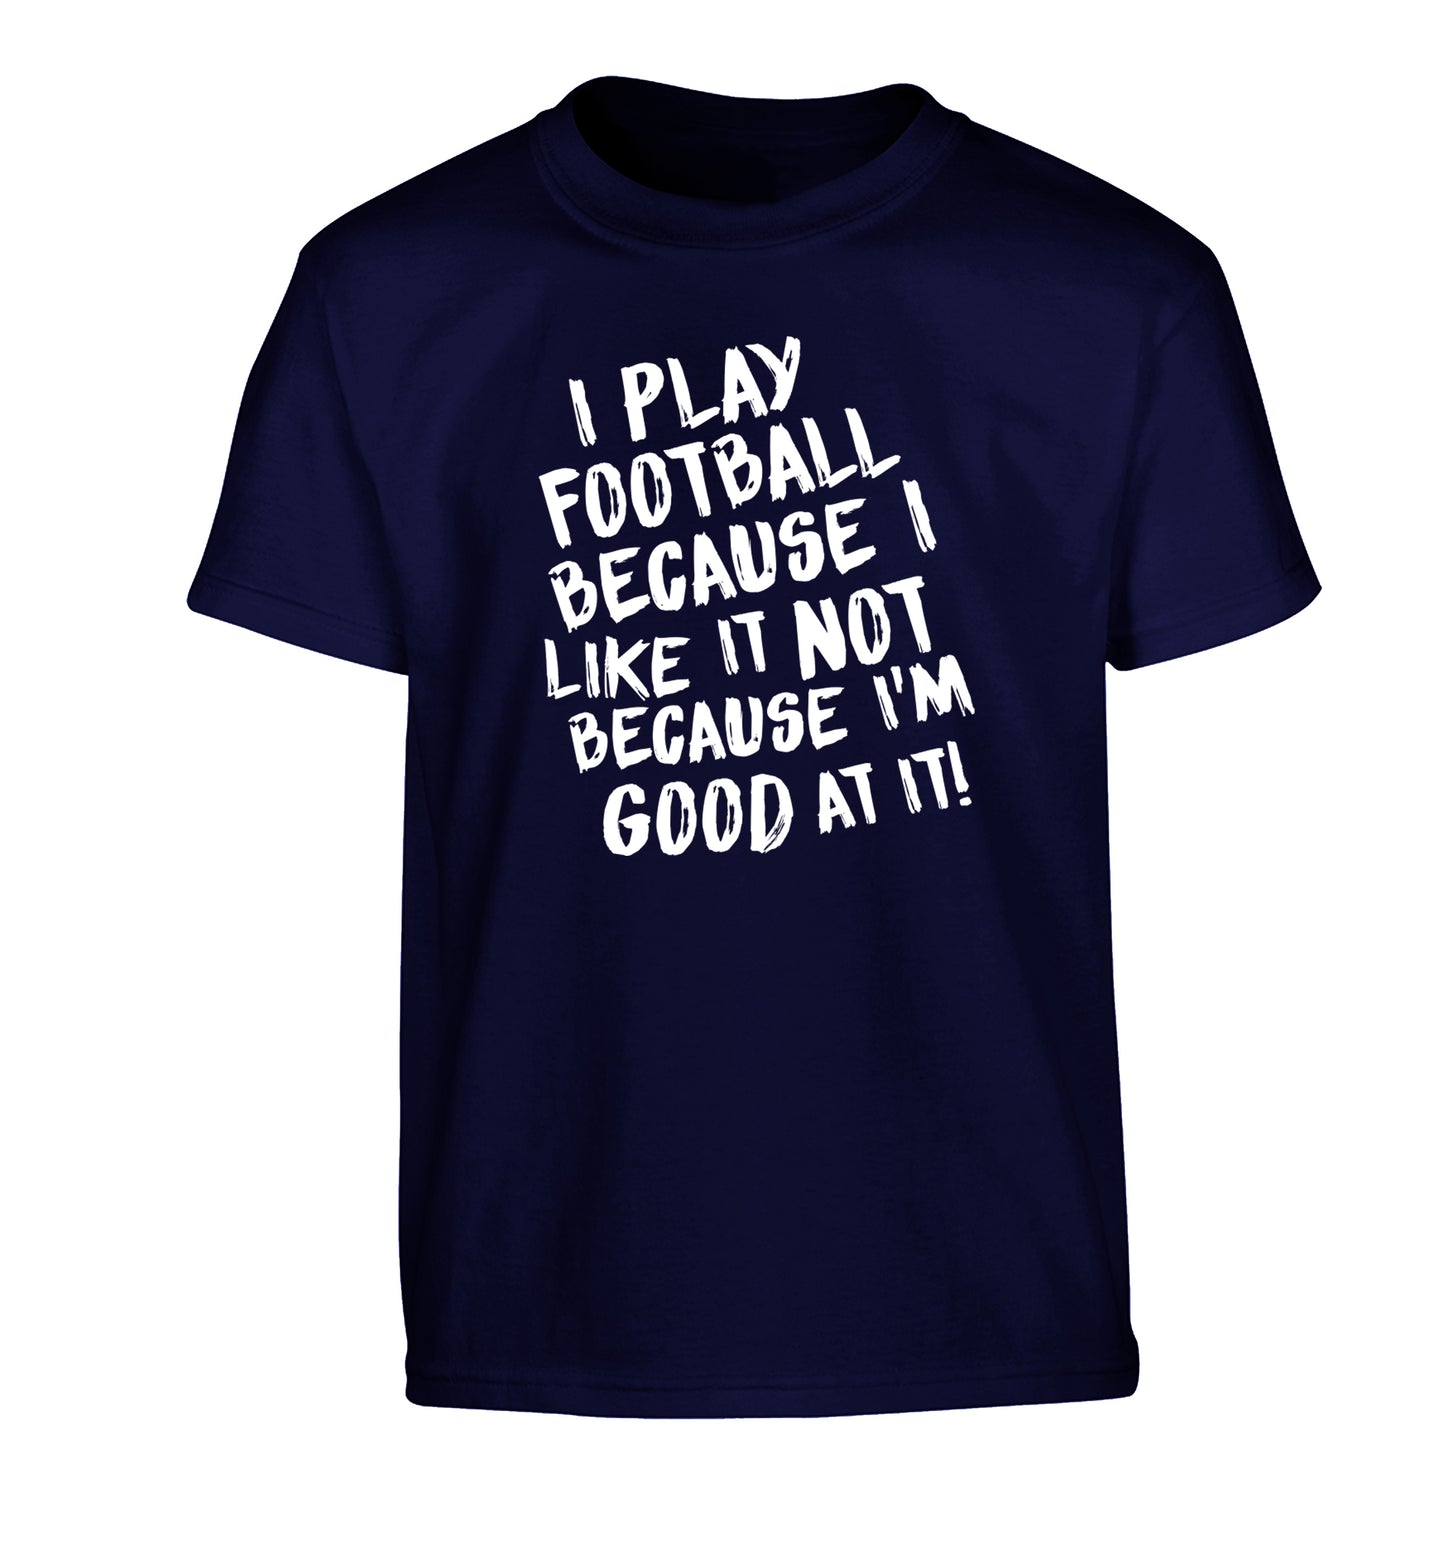 I play football because I like it not because I'm good at it Children's navy Tshirt 12-14 Years